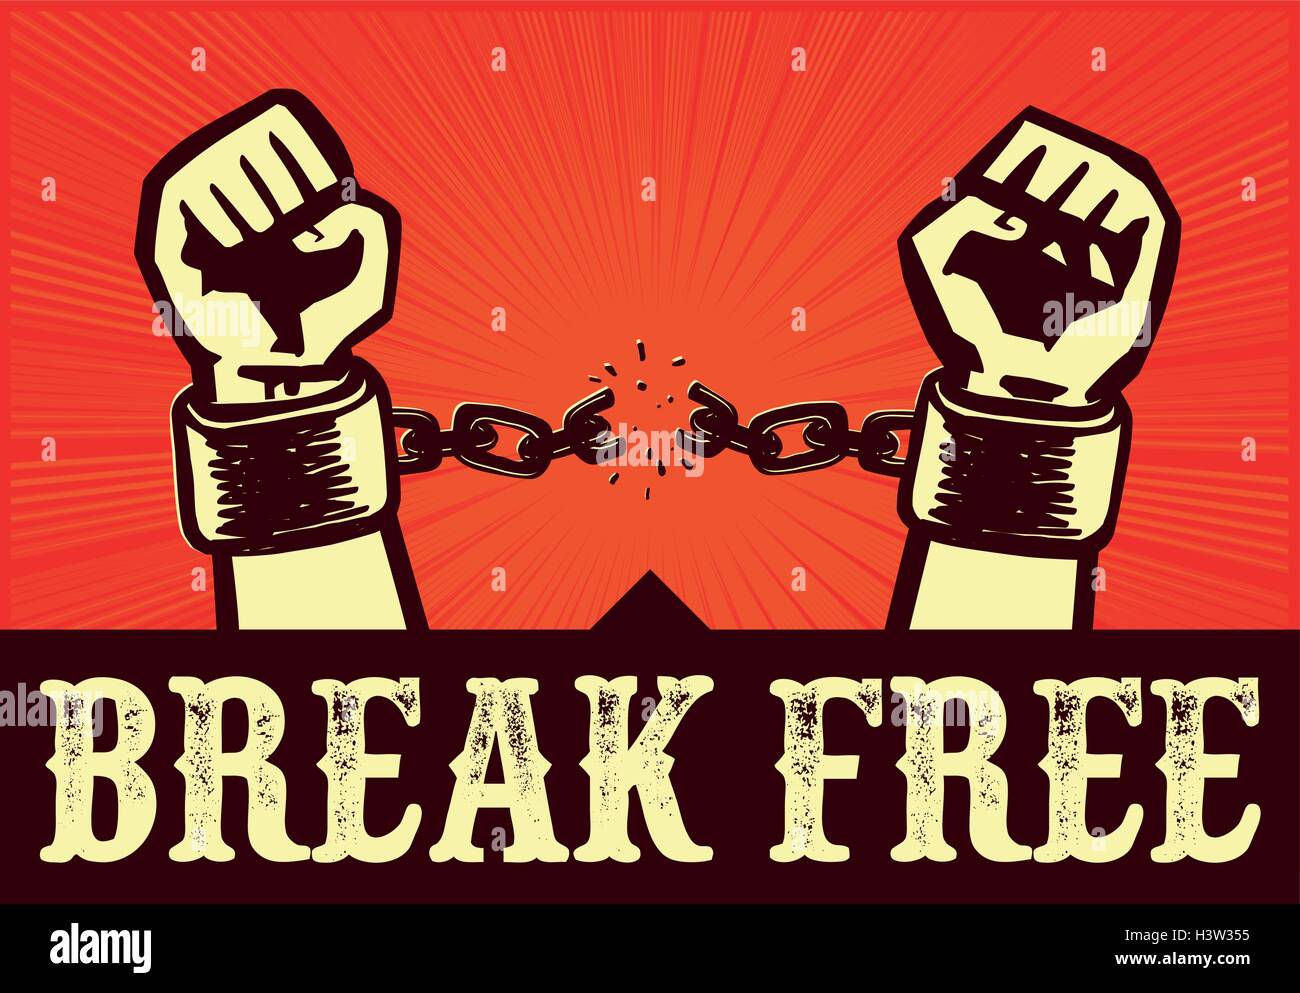 I want to break free! Hands with clenched fists breaking bonds or fetters, cast off the chains around the wrists, throw off the shackles Stock Vector